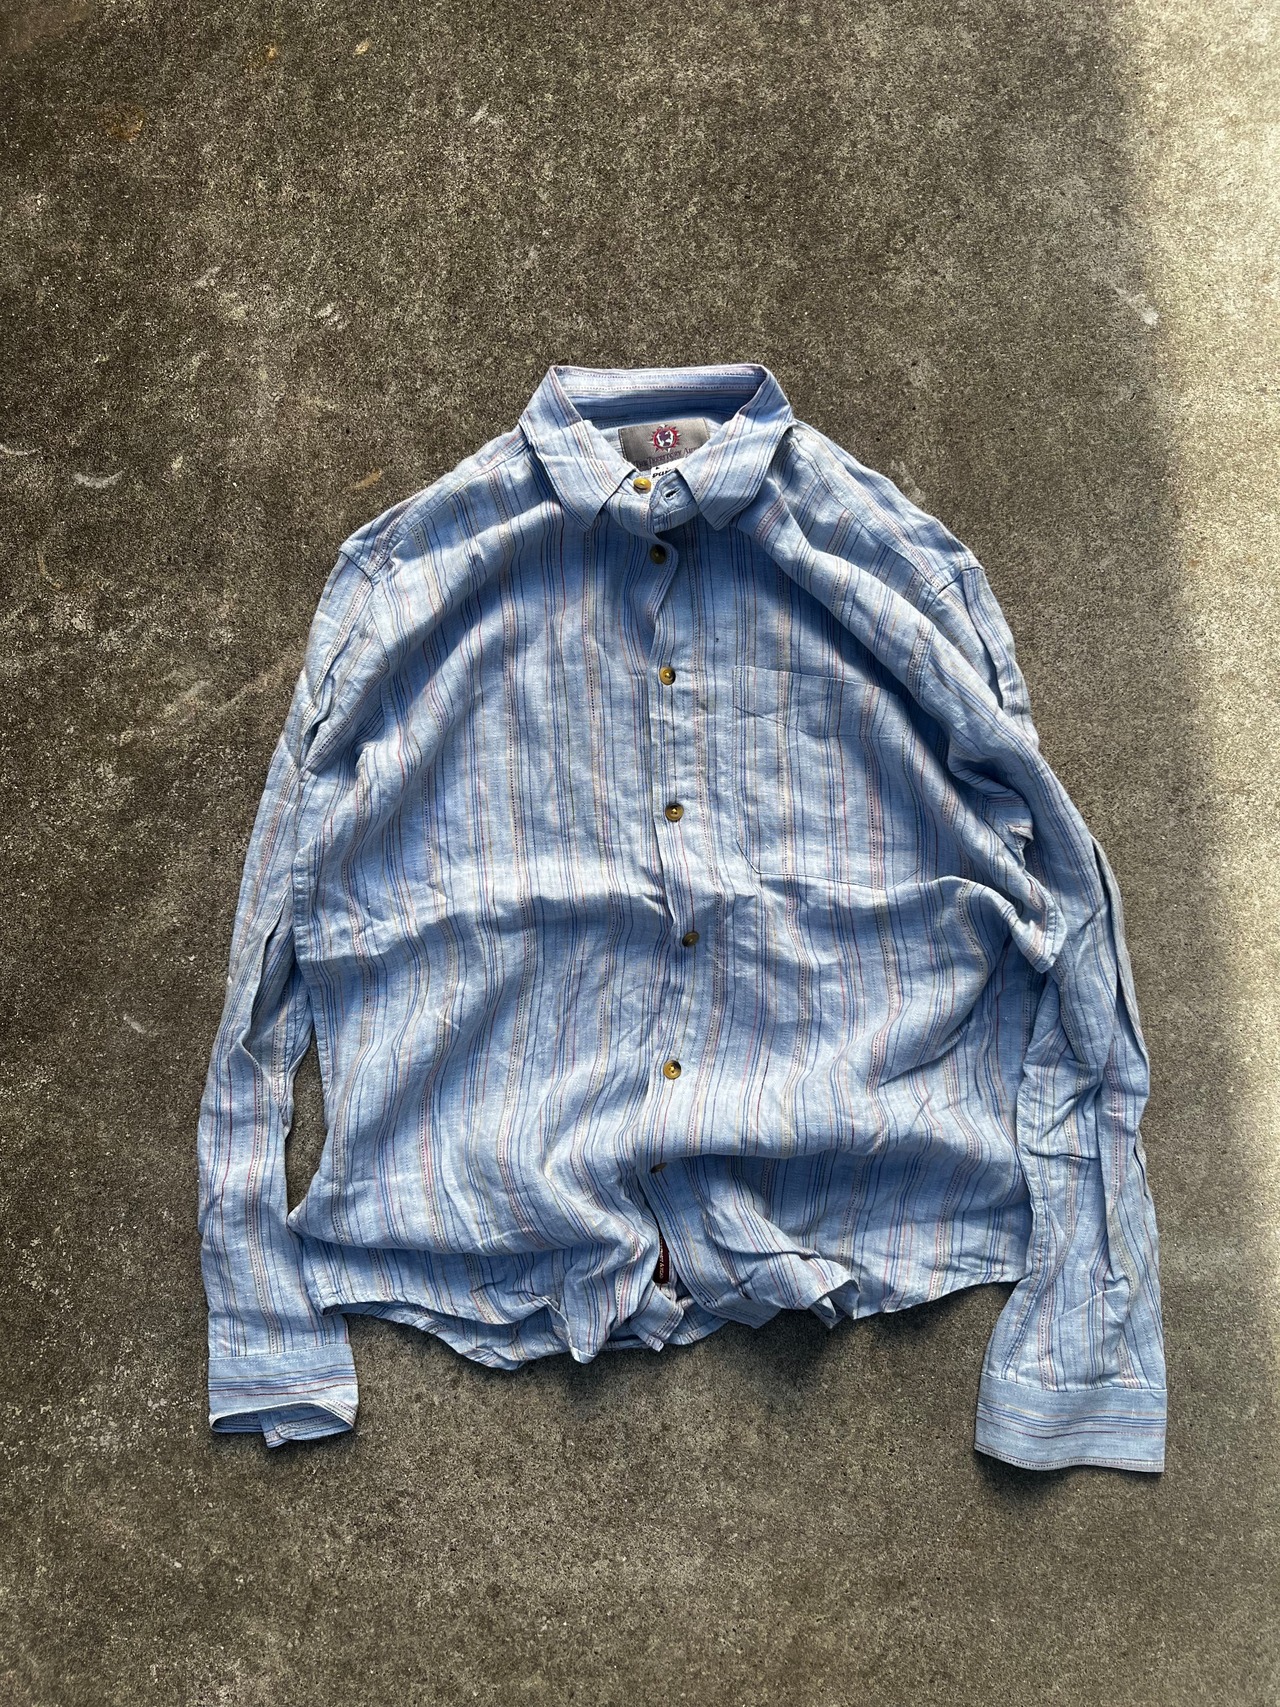 1990s- The Territory Ahead Striped Shirts